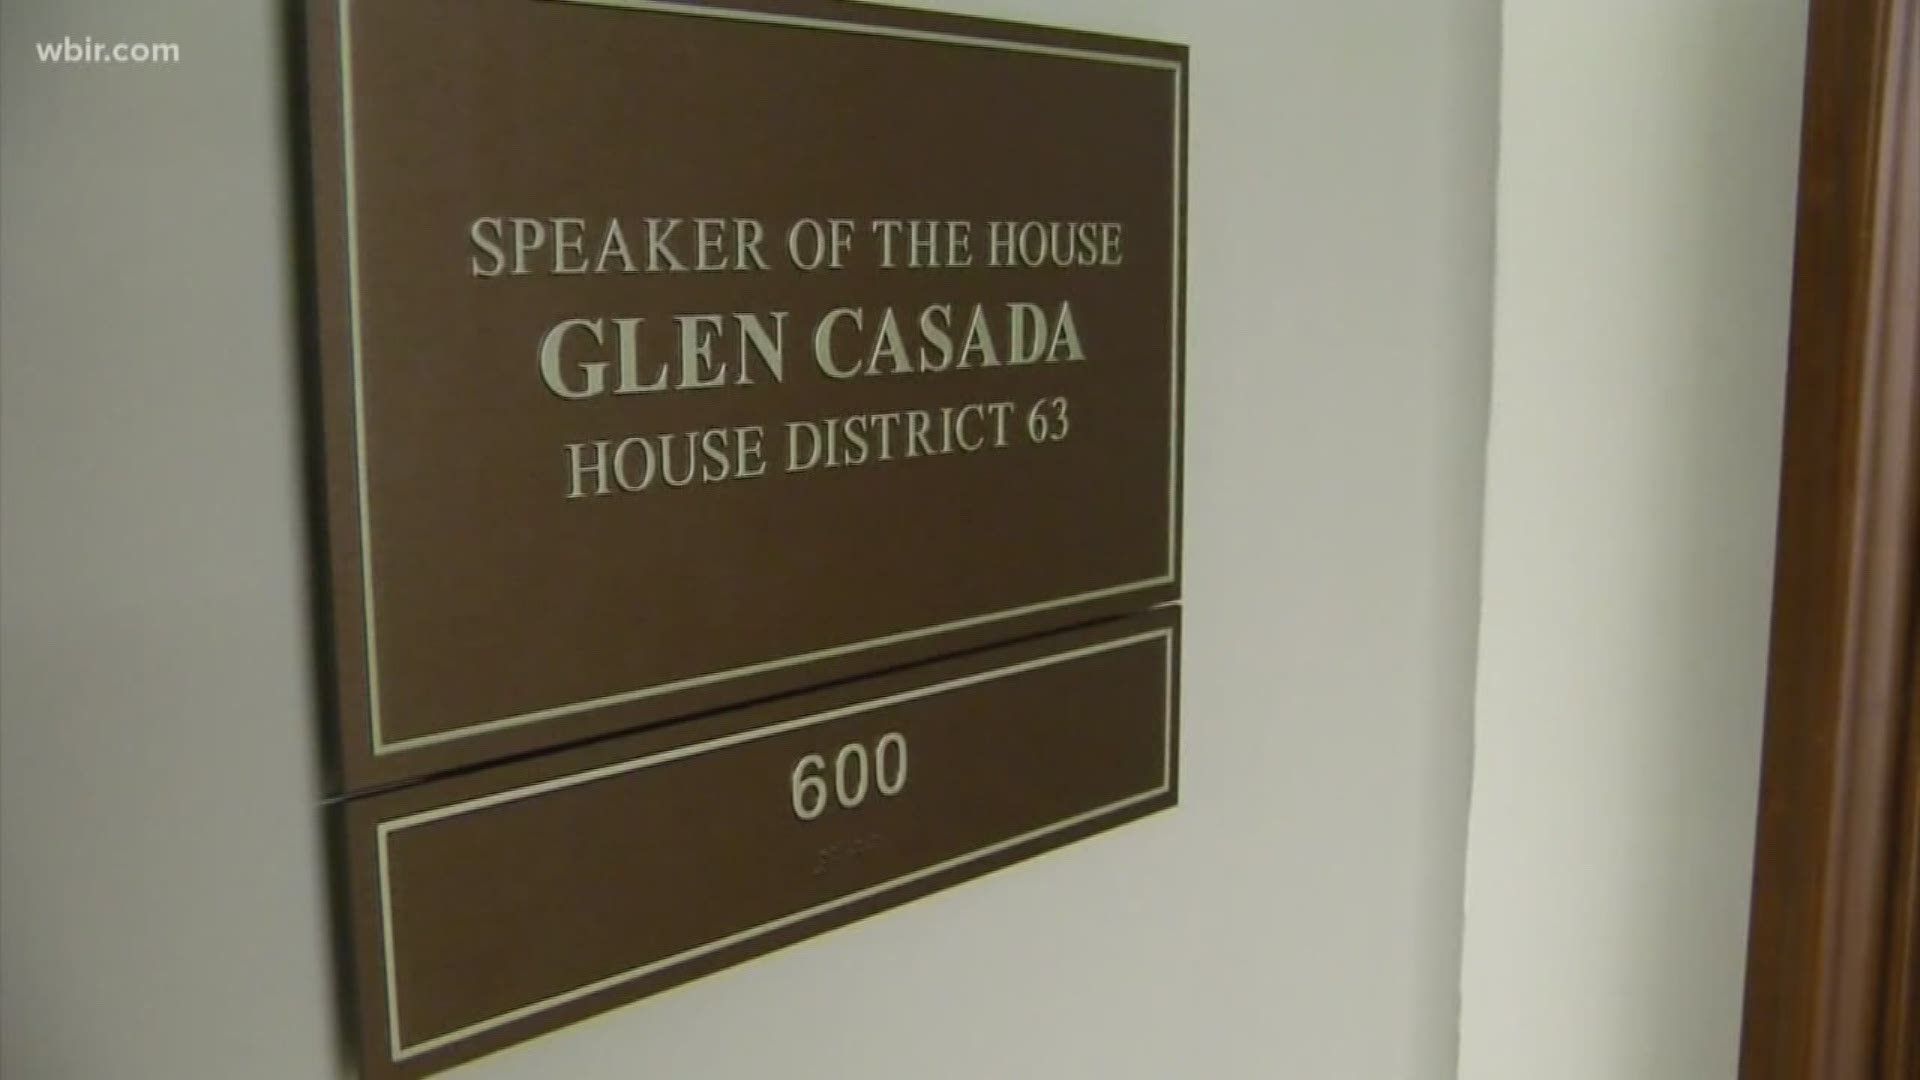 State leaders continue to weigh in the fate of embattled Tennessee House Speaker Glen Casada. He is accused of exchanging lewd messages about women with his former chief of staff. That staffer resigned - after also admitting to sending racist texts - and using cocaine in an office in the Capitol building.